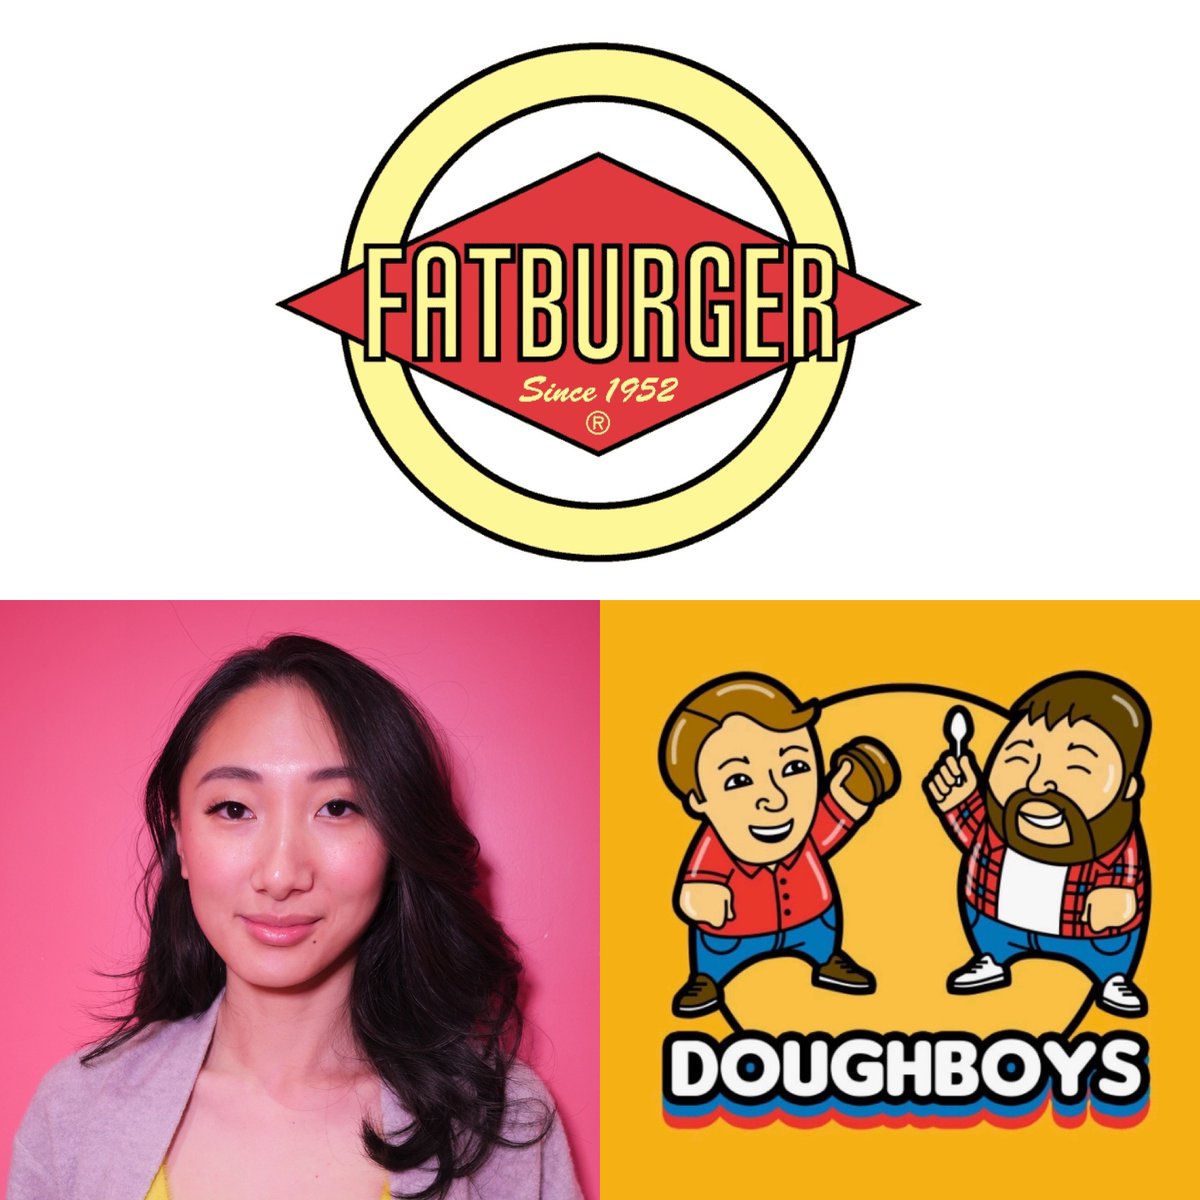 New Doughboys Thursday! Andrea Jin (Digman!, The Late Late Show, Grandma's Girl) joins the 'boys to discuss buffets, A&W Canada, and Vancouver Chinese food before a review of Fatburger. Plus, another edition of Slop Quiz. headgum.com/doughboys/fatb…